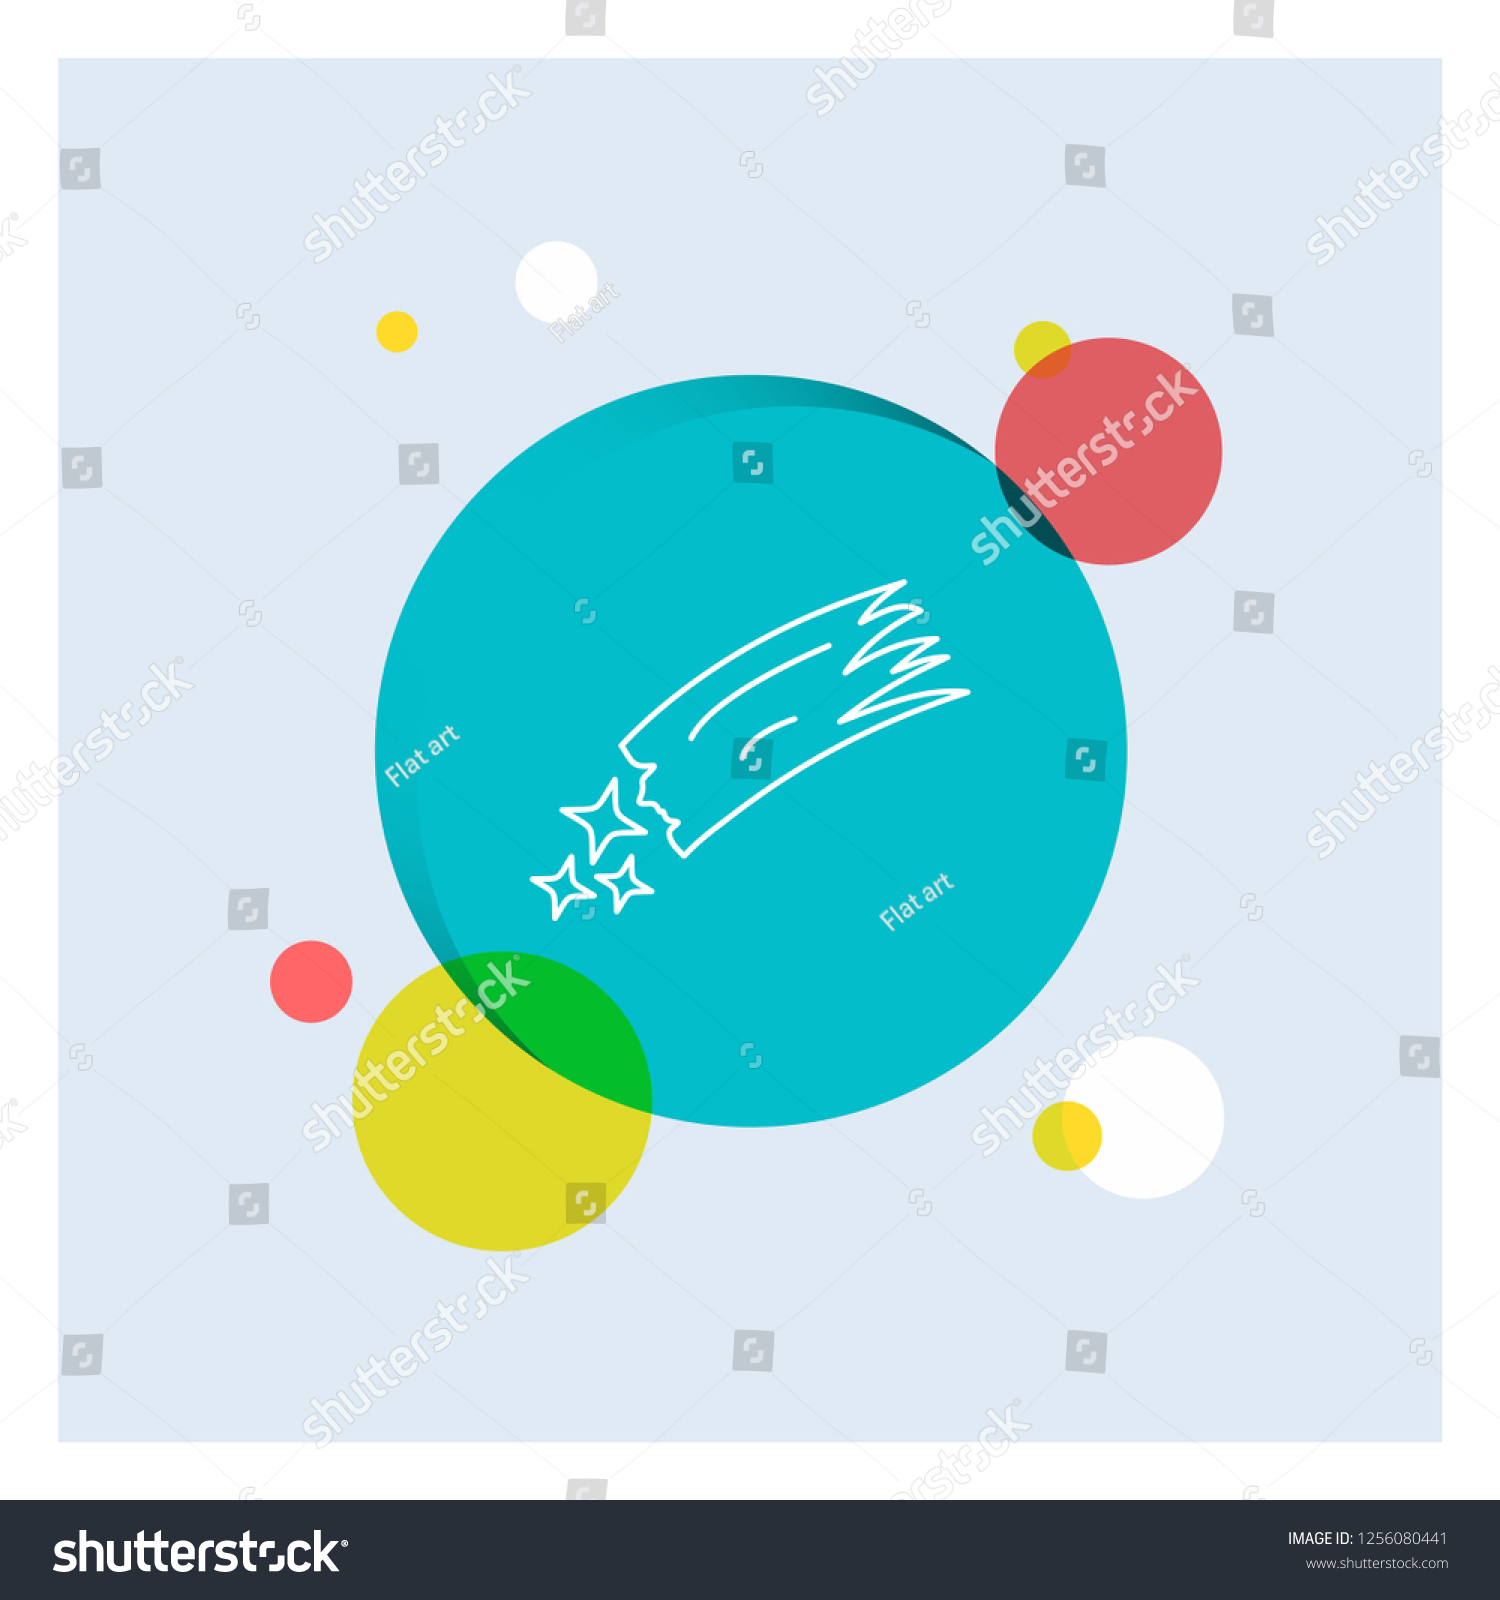 Asteroid, astronomy, meteor, space, comet White Line Icon colorful Circle Background #1256080441